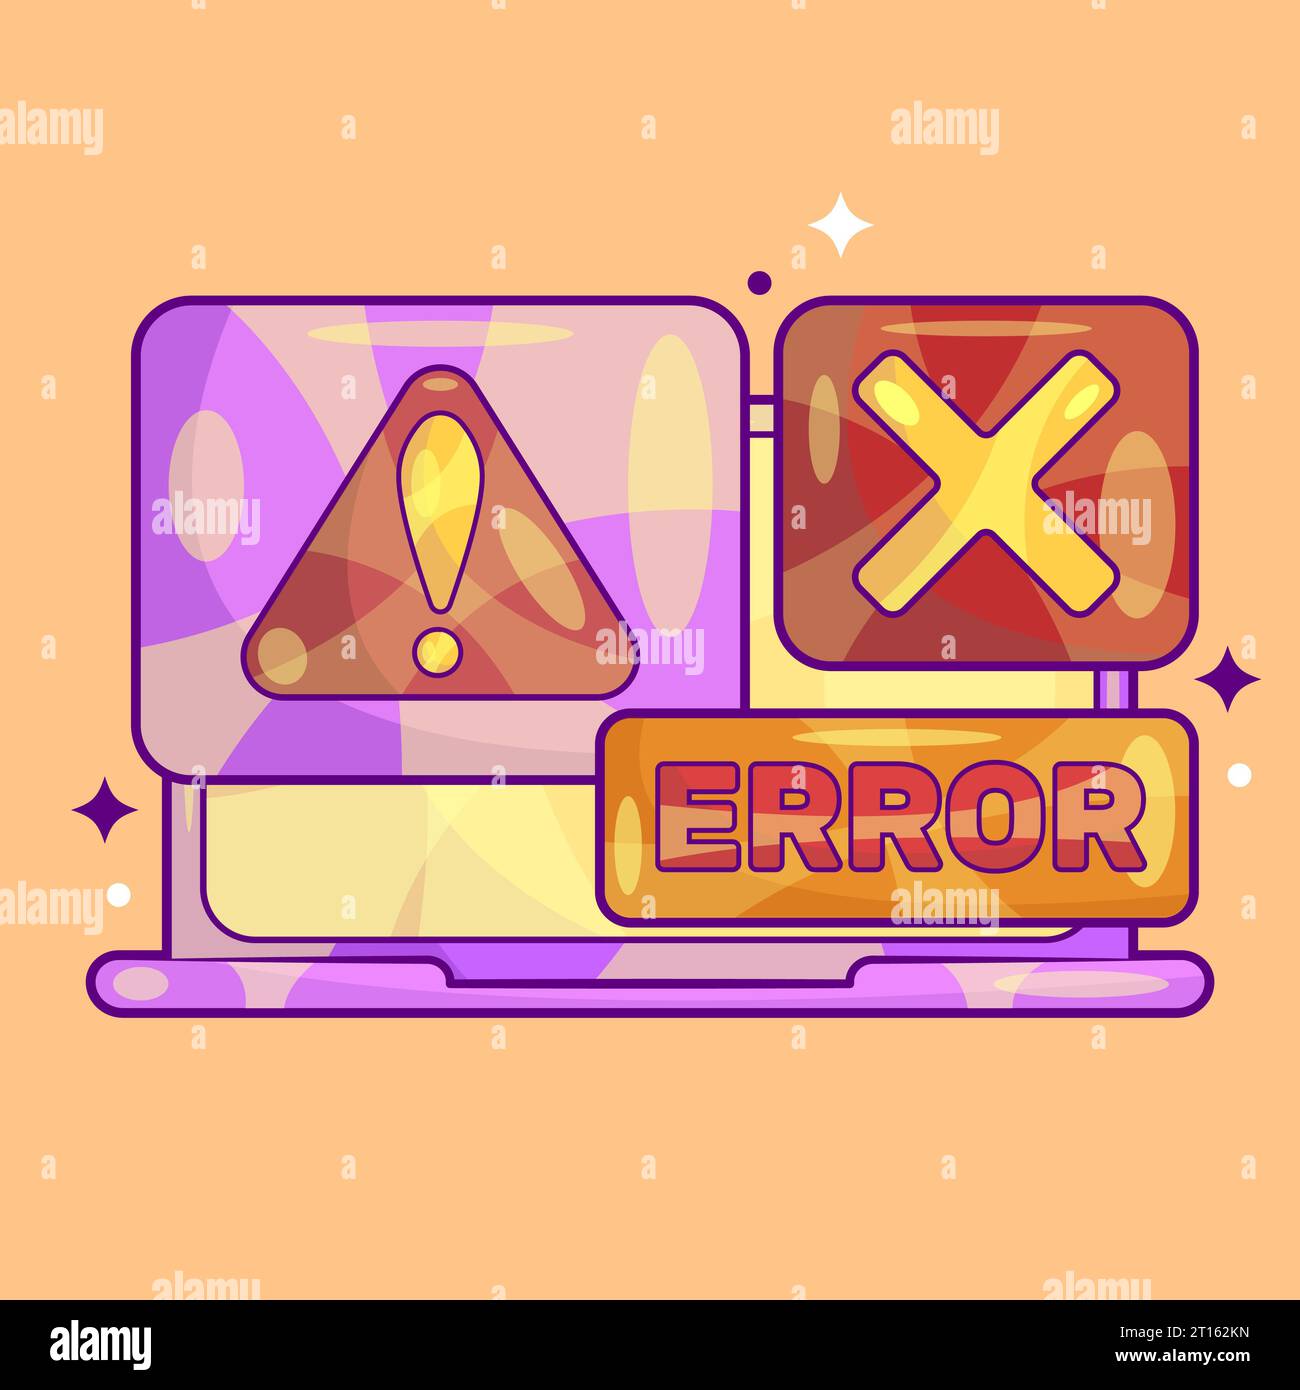 Laptop with System Error Screen Concept Vector Stock Photo